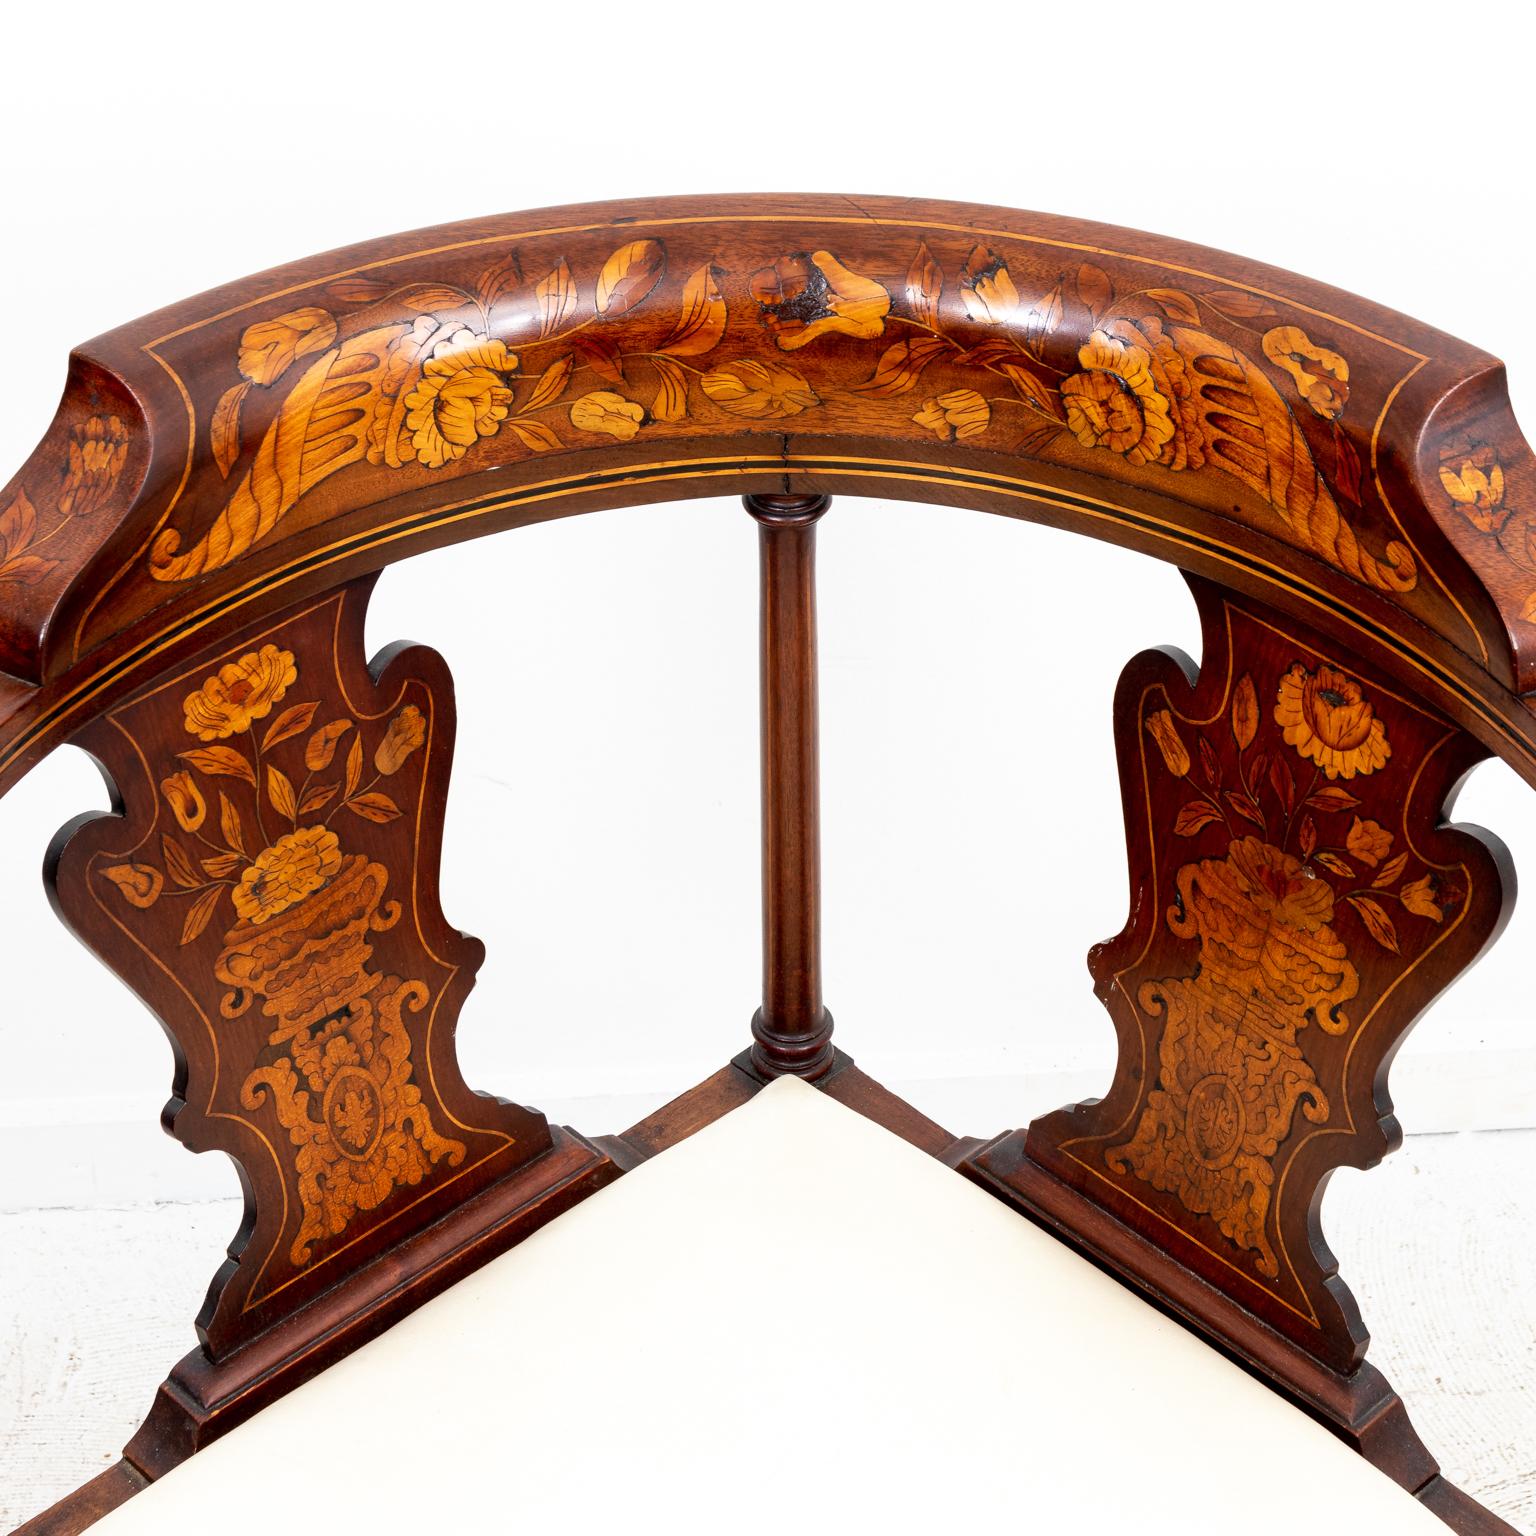 Dutch mahogany corner chair with newly upholstered seat, curved back splats, and cabriole legs on ball and claw feet. The piece also features lightwood marquetry ornamented with flowers and shellwork. Please note of wear consistent with age